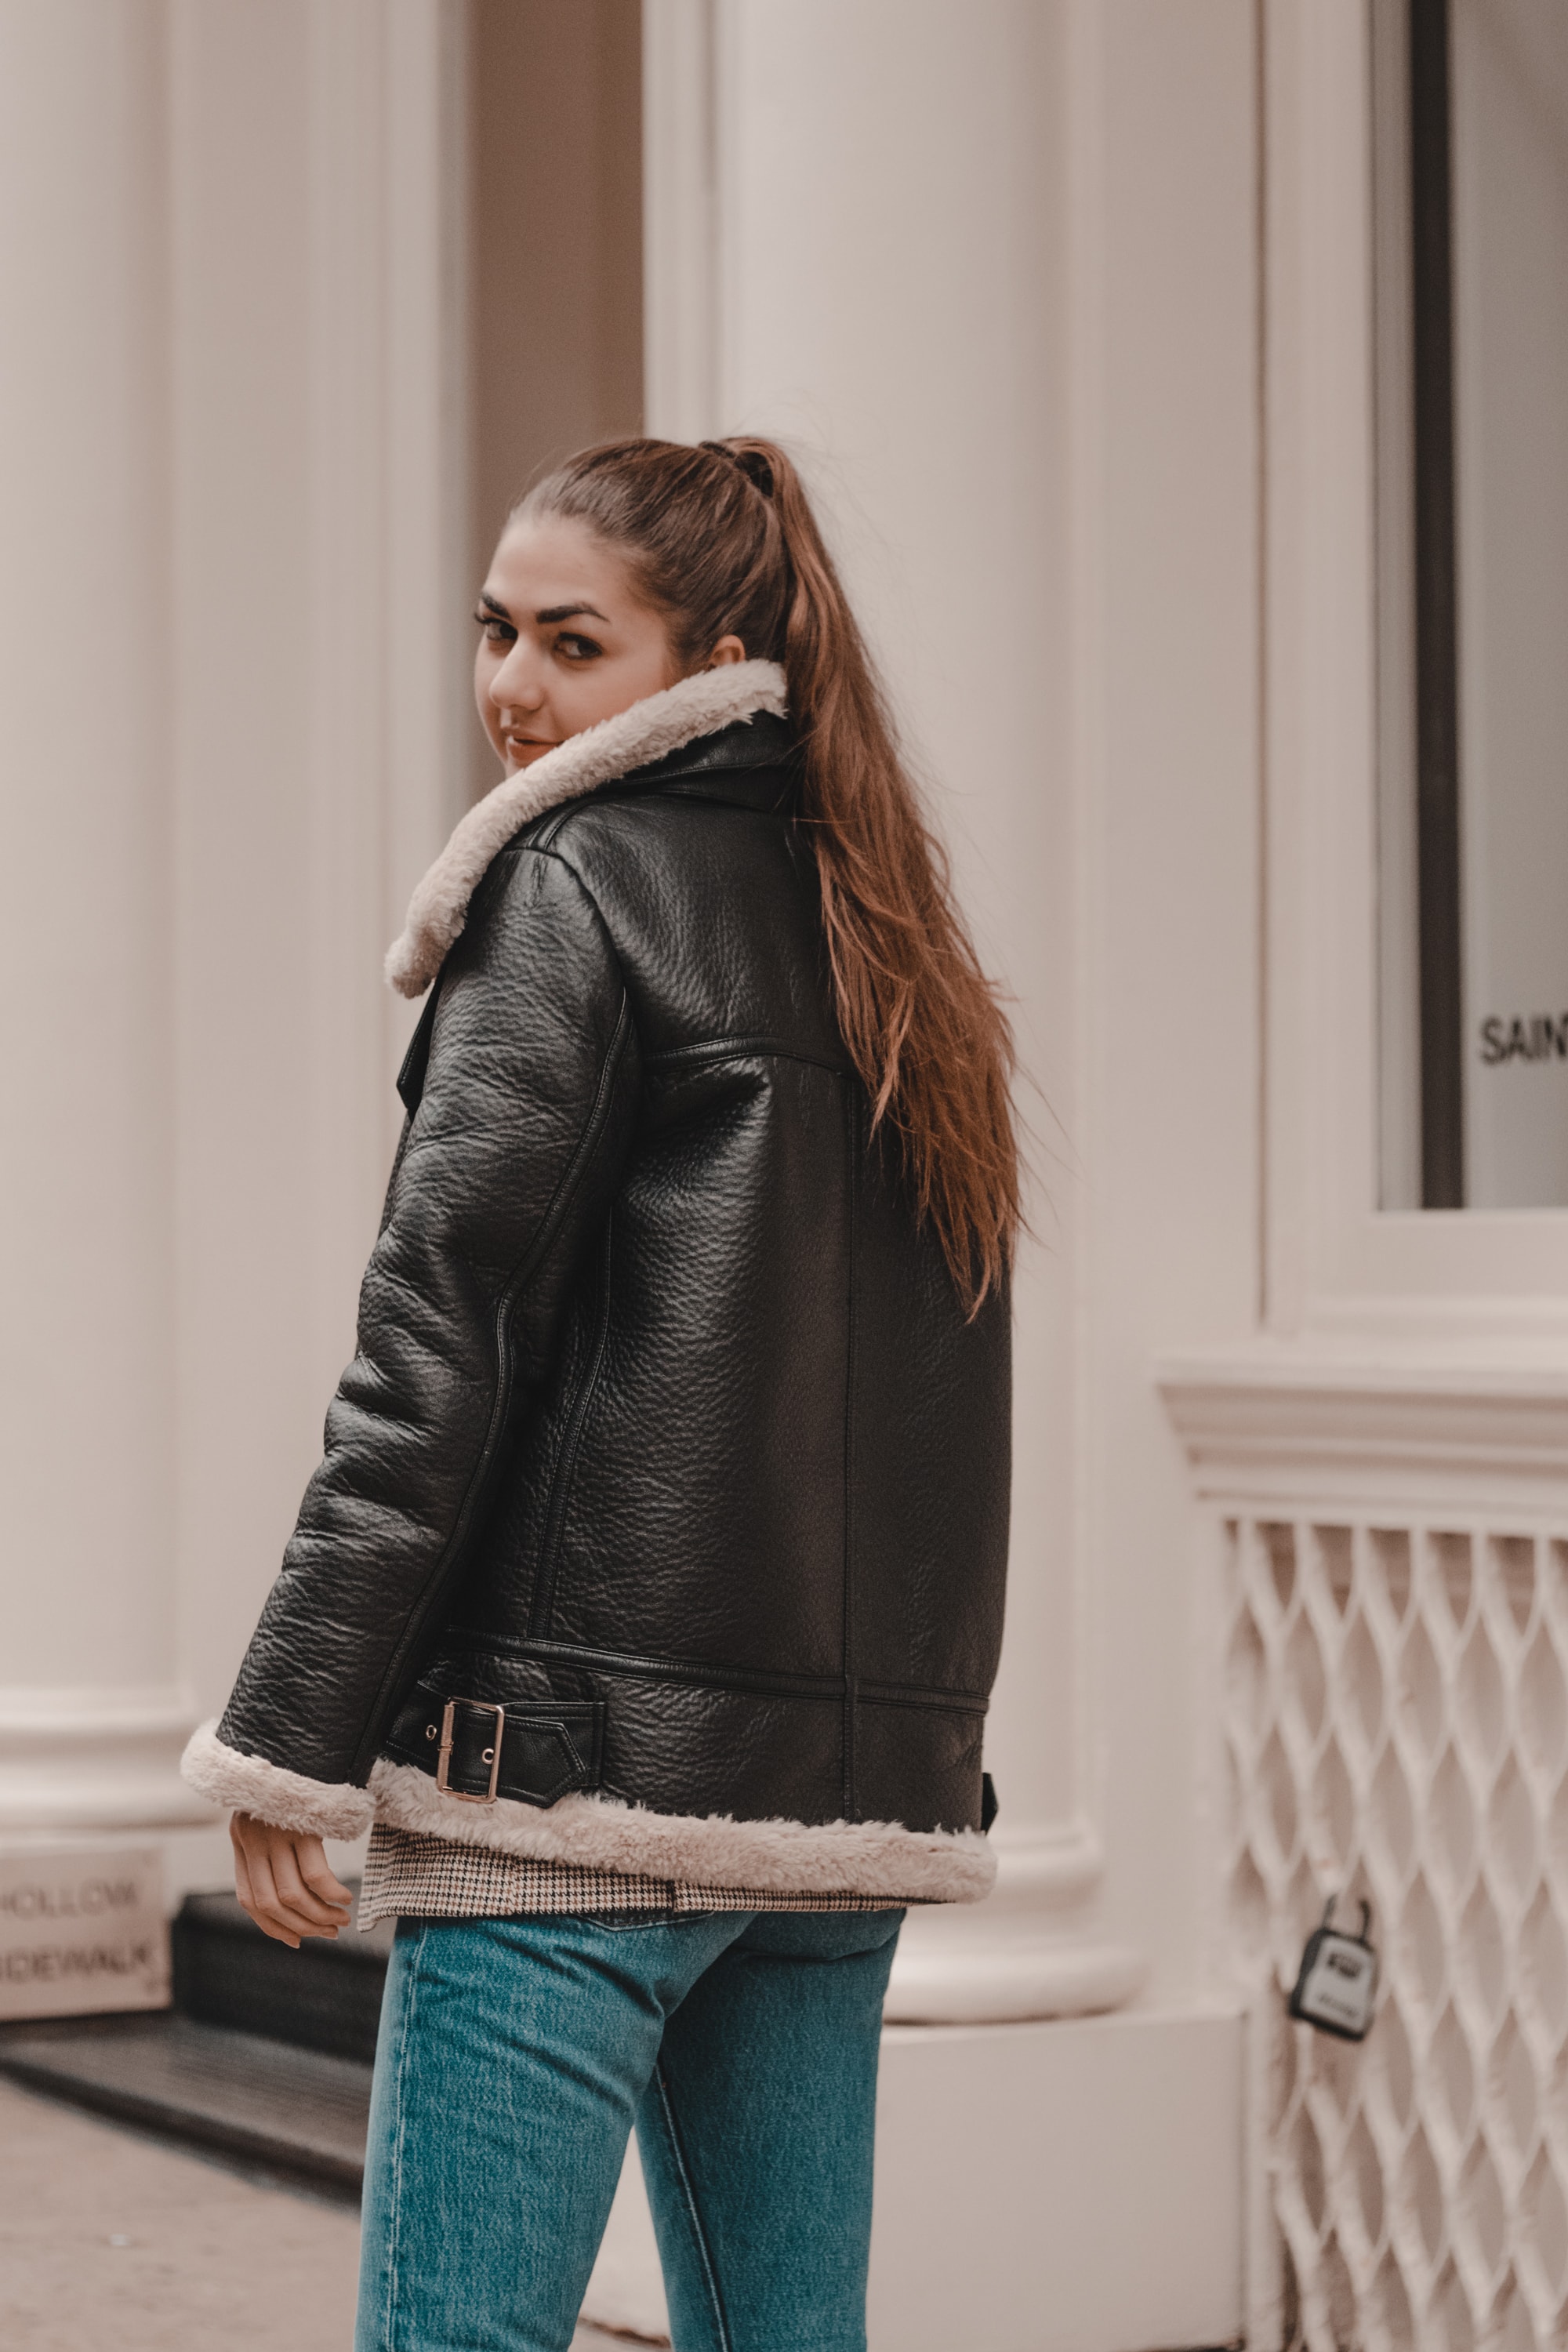 Outfit, Street Style, OOTD, Girls, Outfits, Fashion, Style, Trend, Trending, Inspiration, Editorial, New York, Biker Jacket, Denim, Levi's, Long Hair, Ponytail, Carmitive